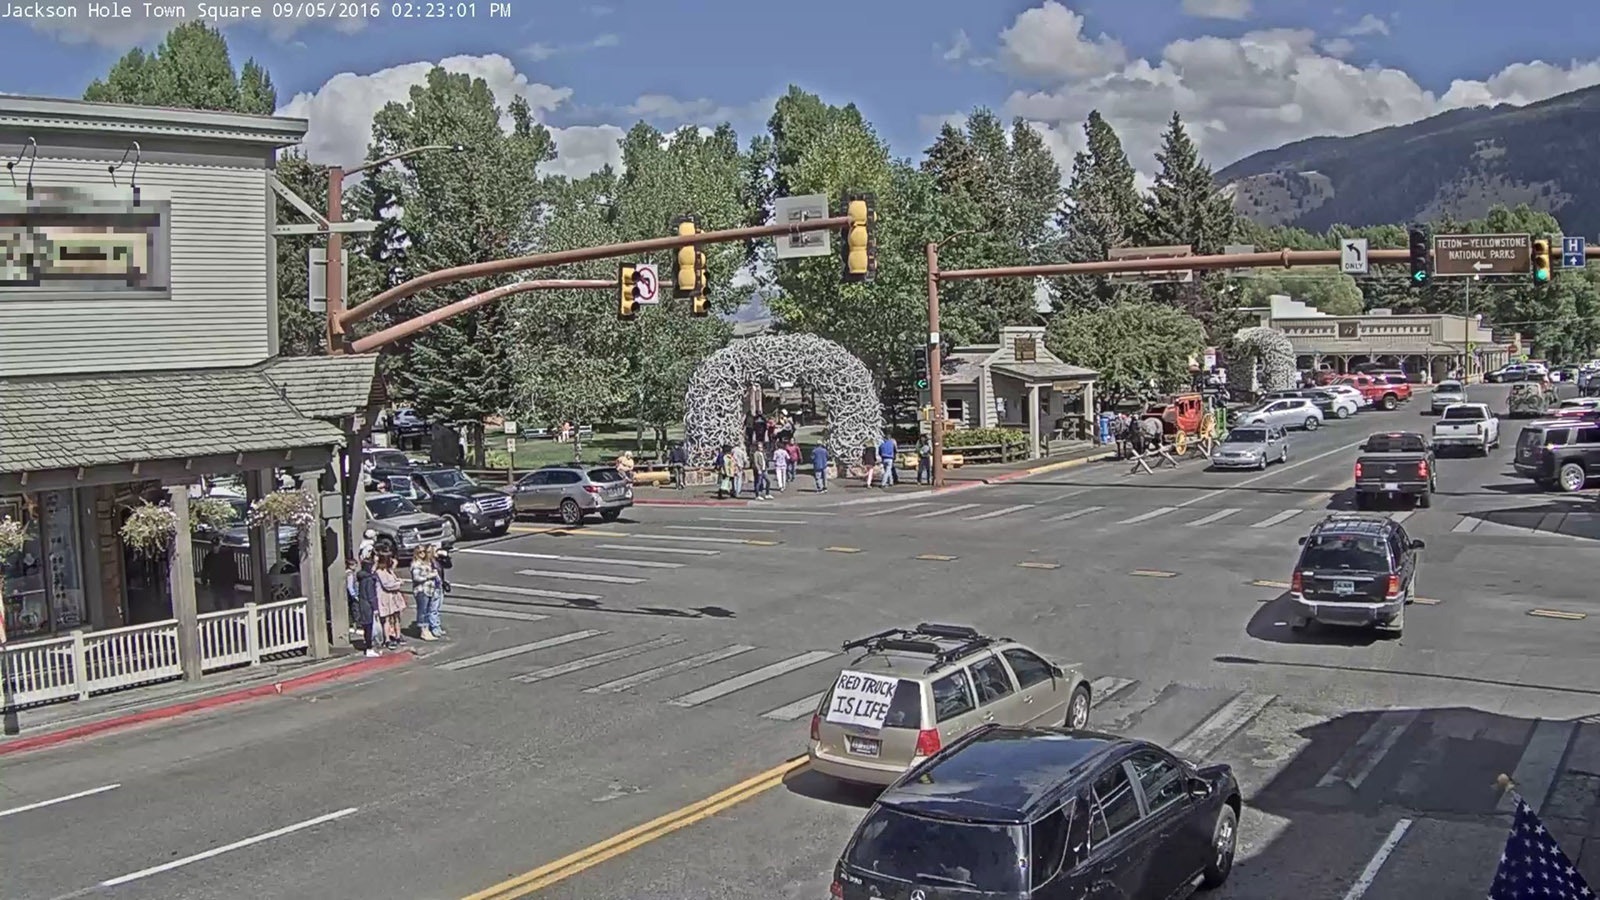 A short-lived phenomenon in 2016 was for people to point out red trucks on the Jackson Hole webcam showing the town's main intersection.